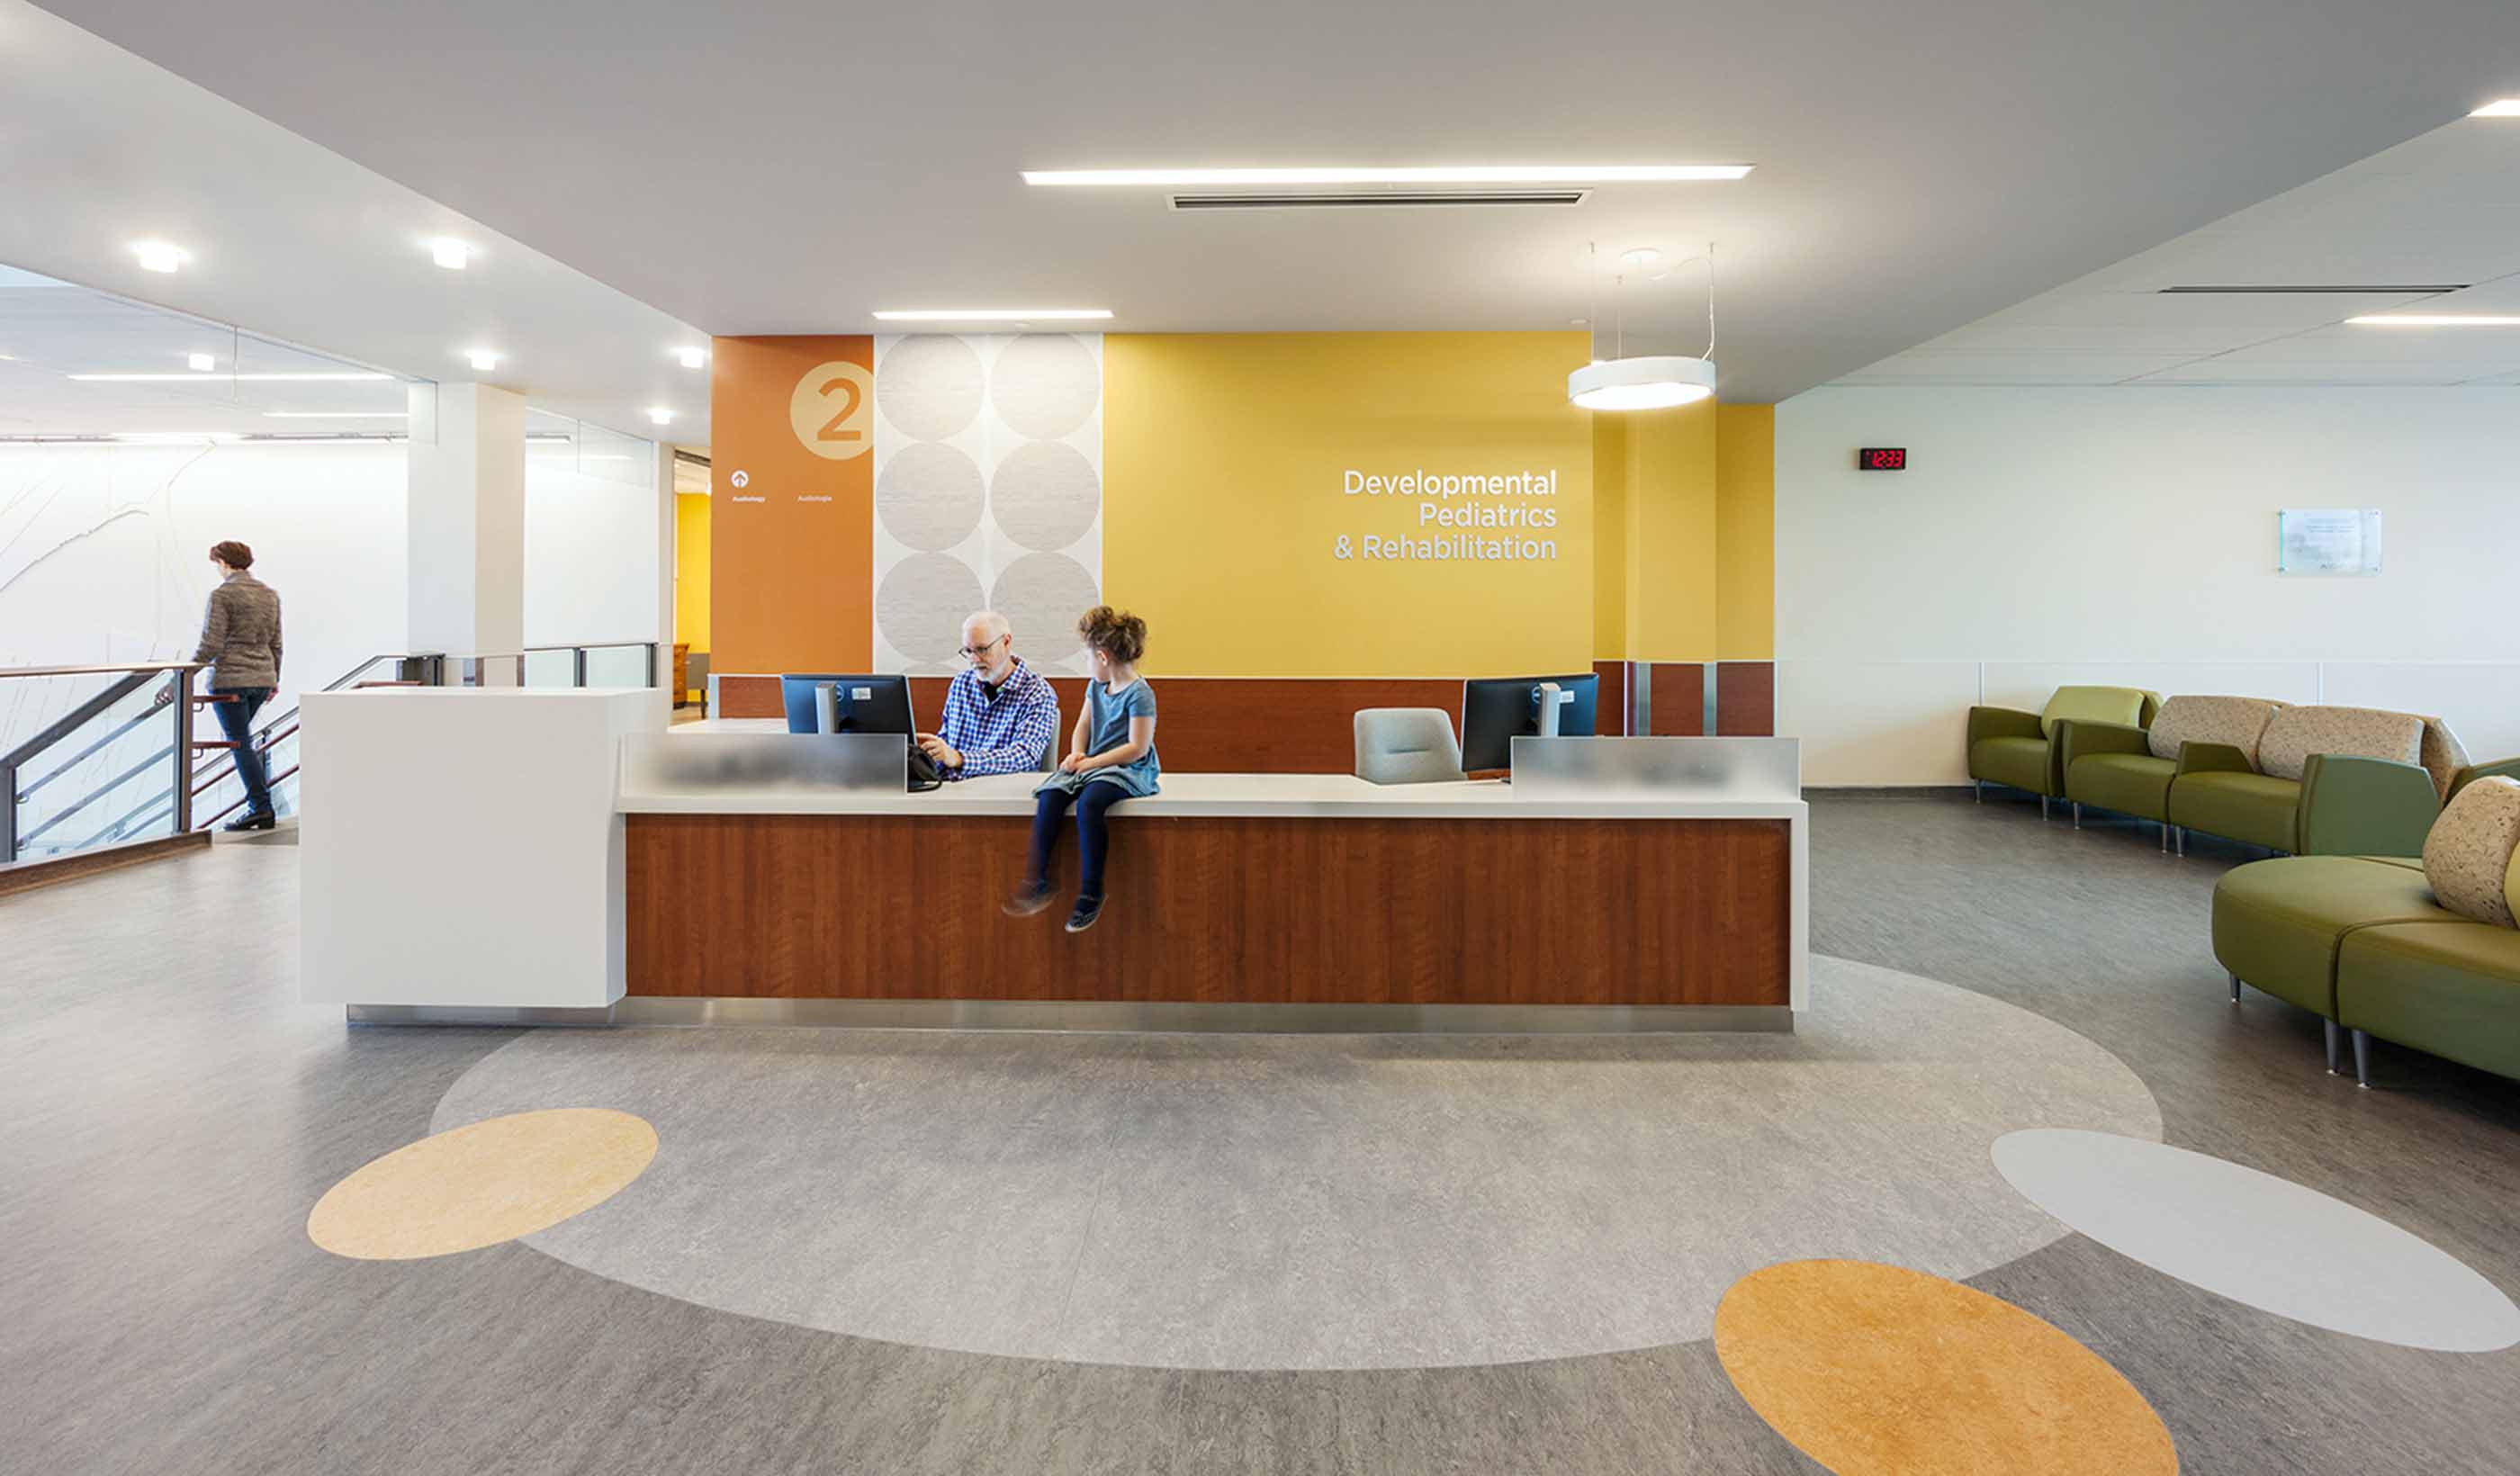 Grounded art: Flooring in healthcare spaces increases in creativity and impact